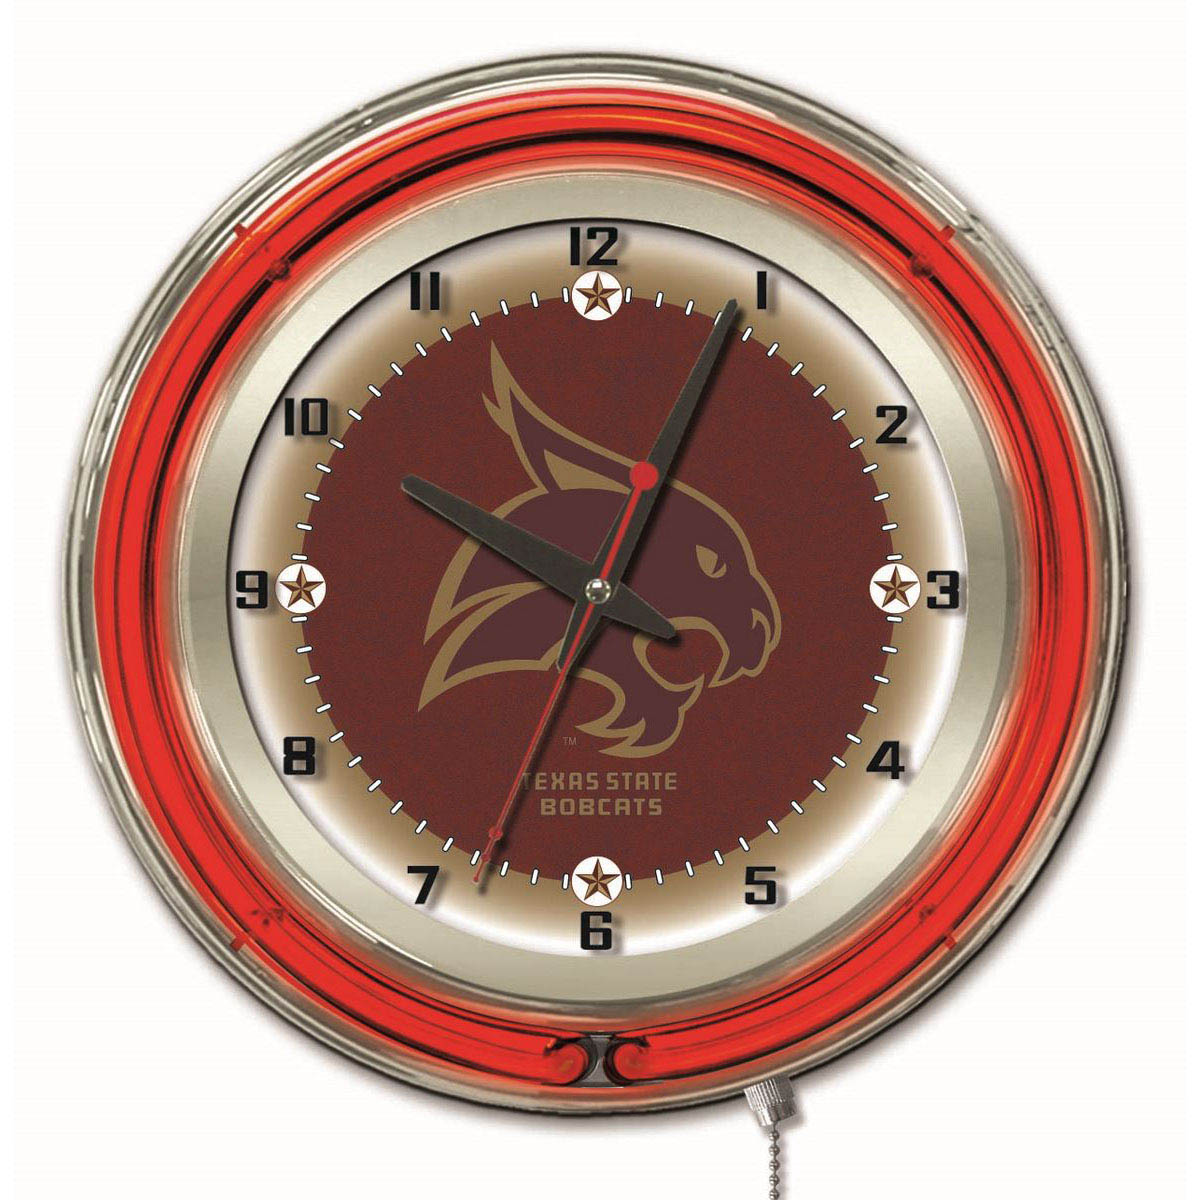 19 inch Texas State Neon Clock